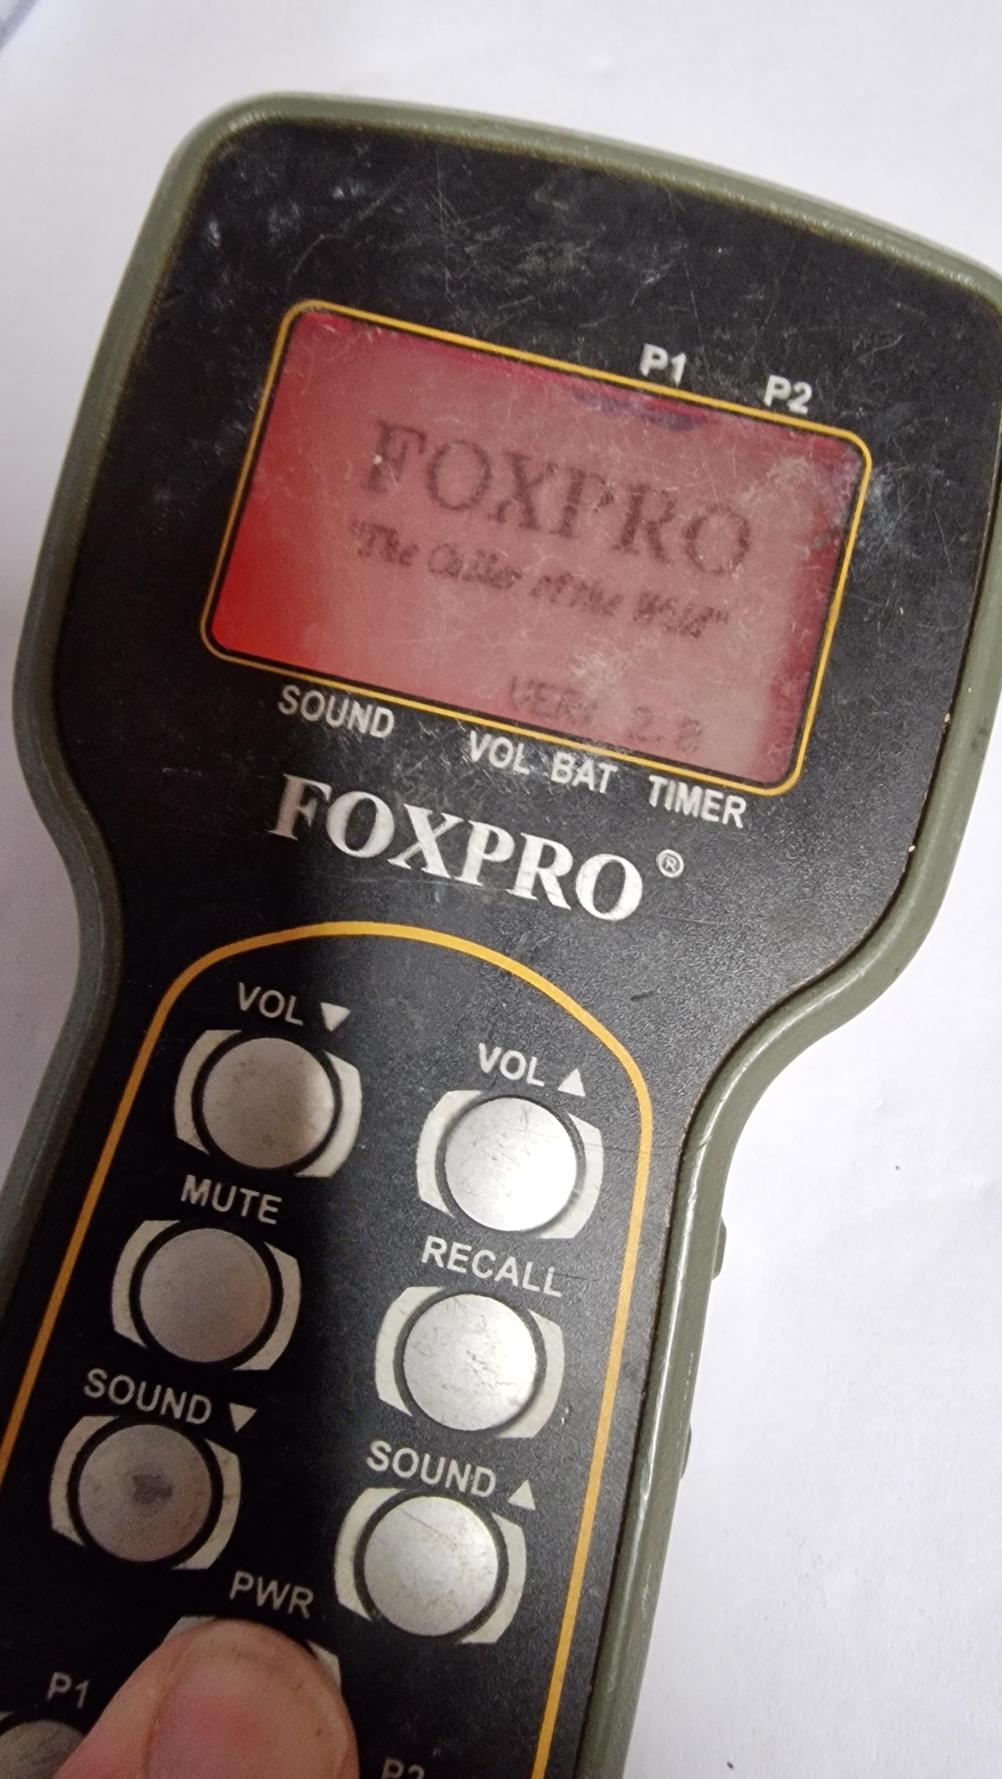 Foxpro  Remote Control - Inside Image